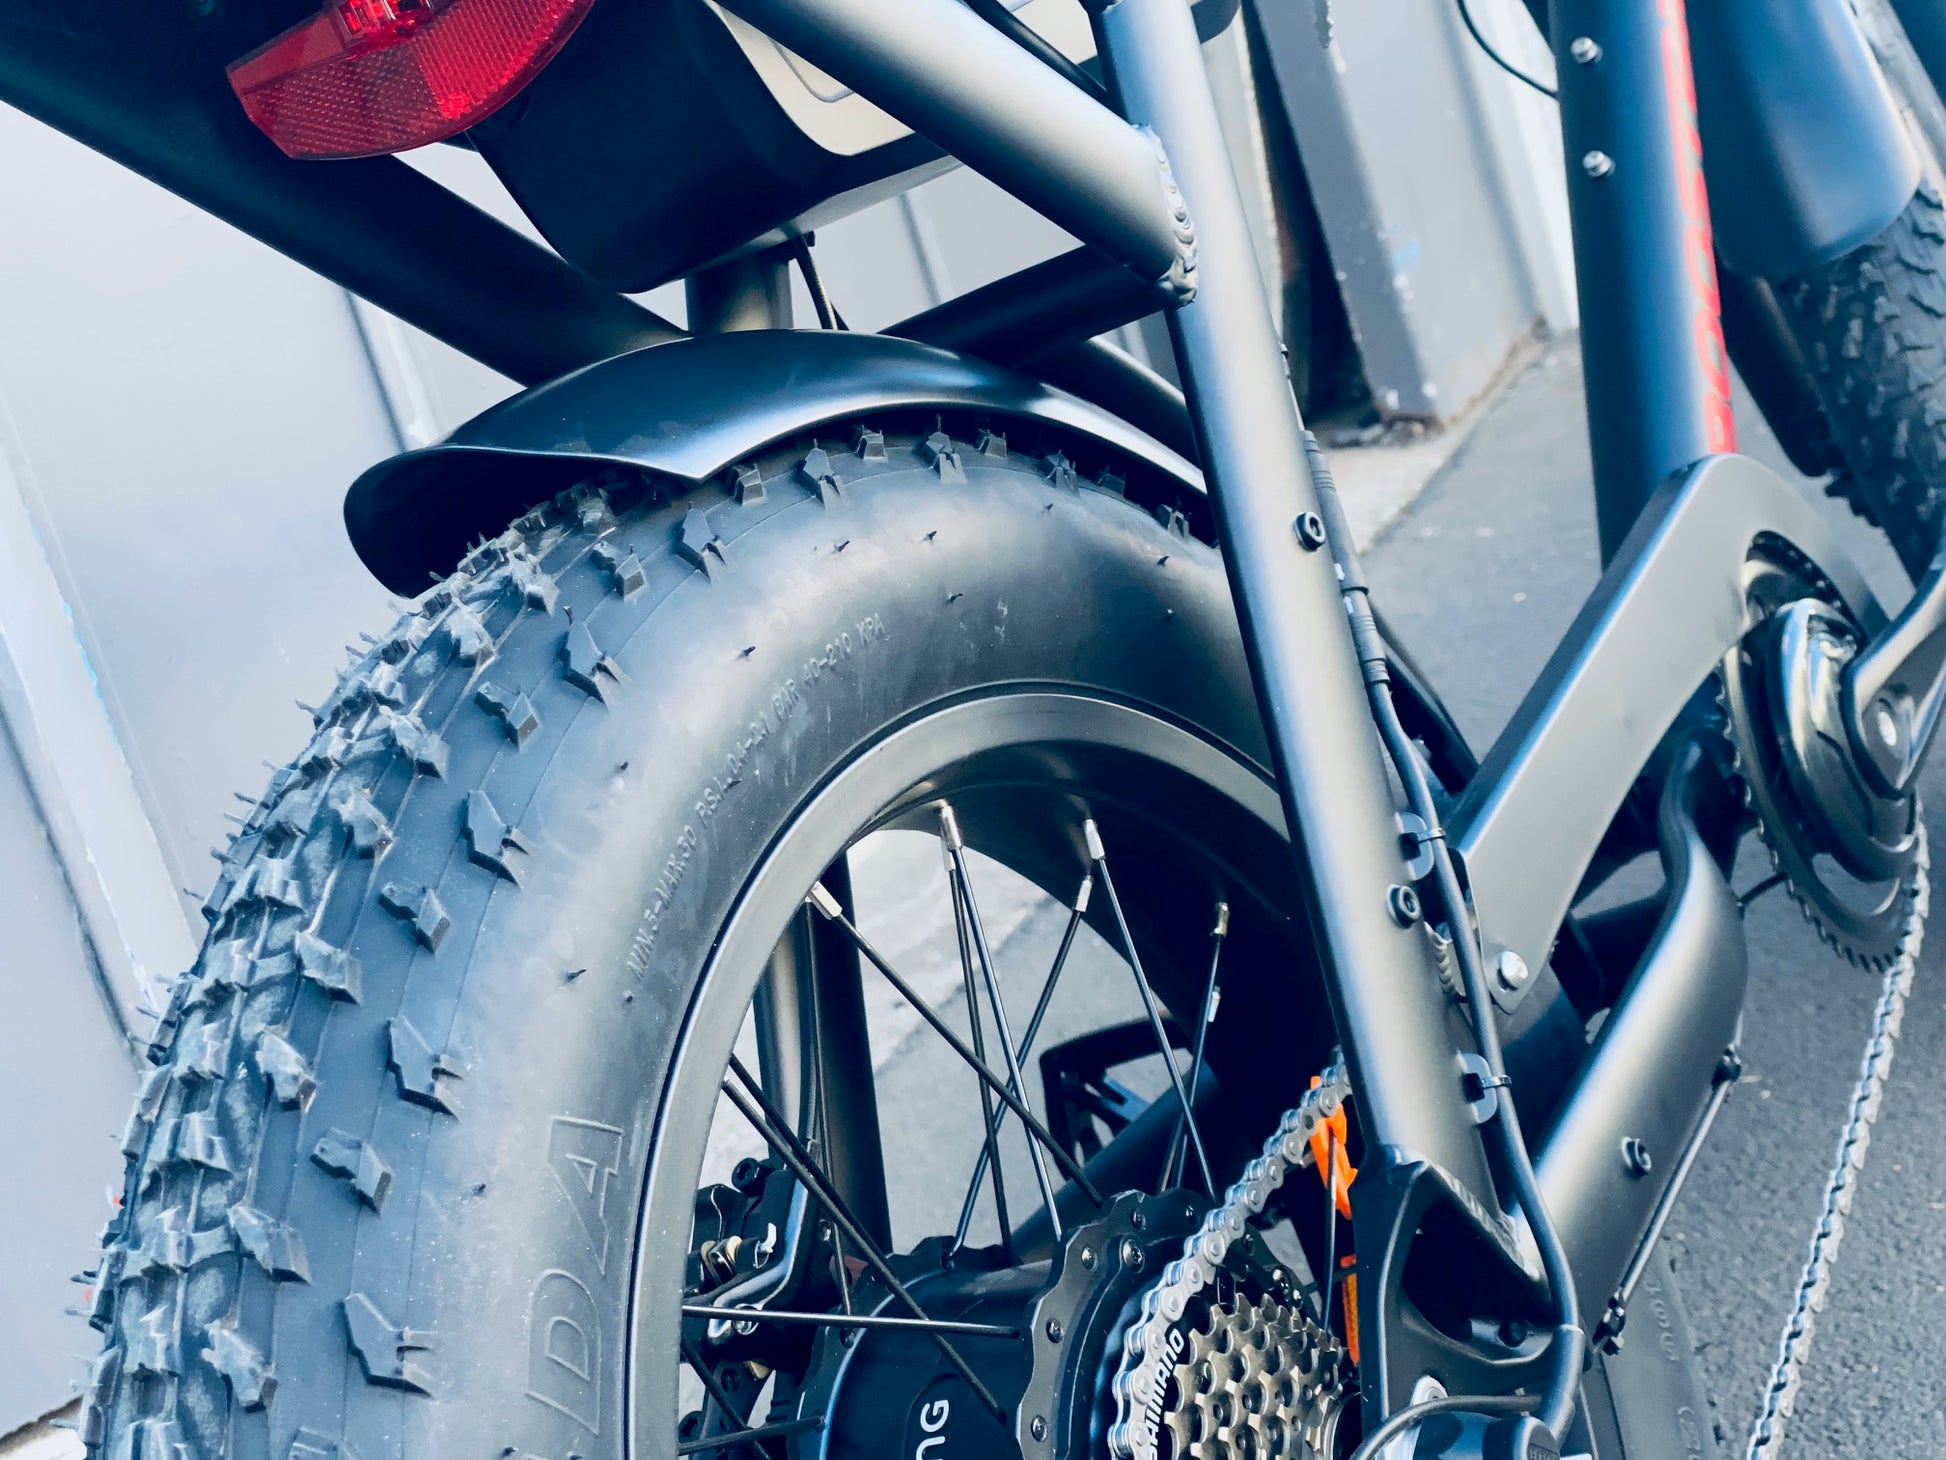 Electric Moped style in a 20" SUPER 73 fat tyre package. Apache Electric Bike from Boostbikes.